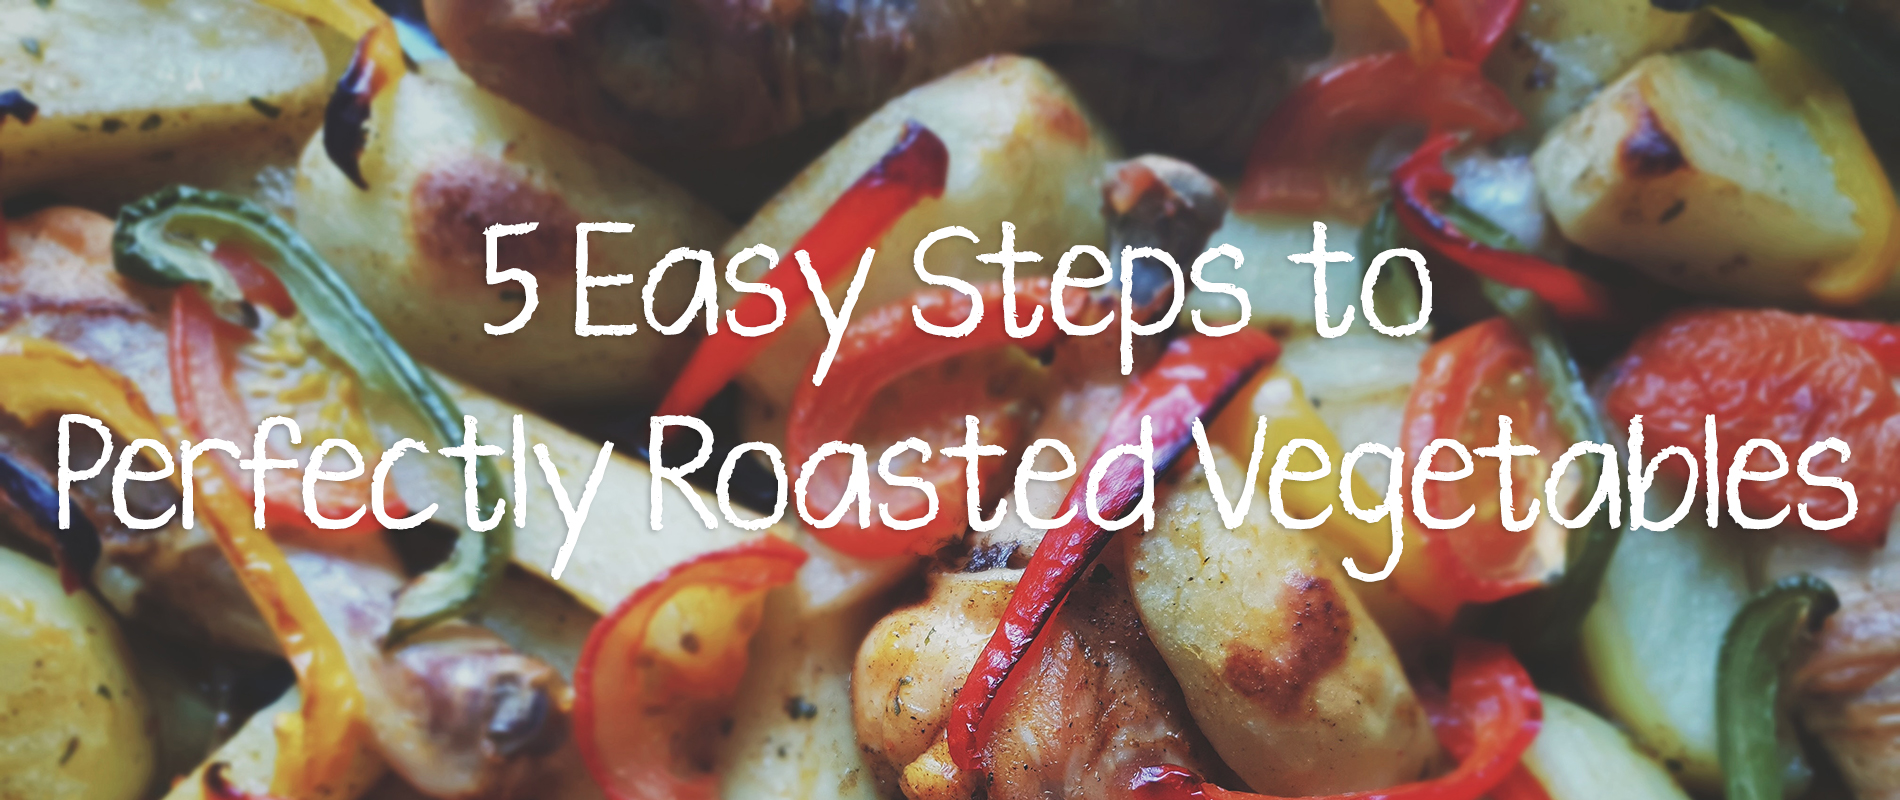 5 Easy Steps to Perfectly Roasted Vegetables